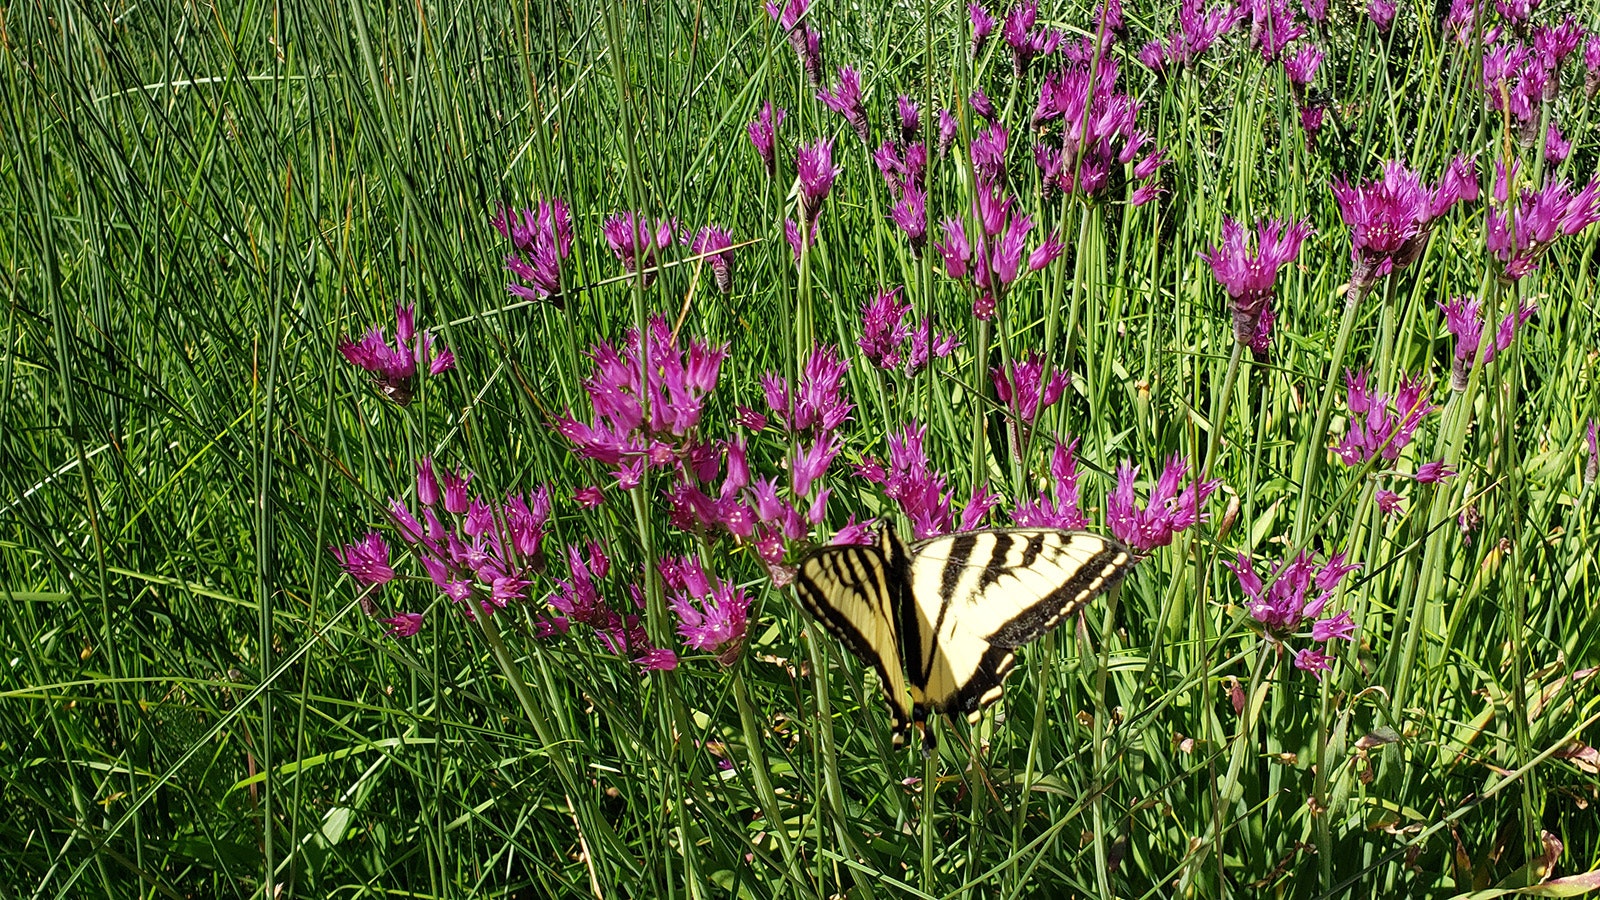 Rains made a pretty feast for butterflies at many locations across the state this summer.